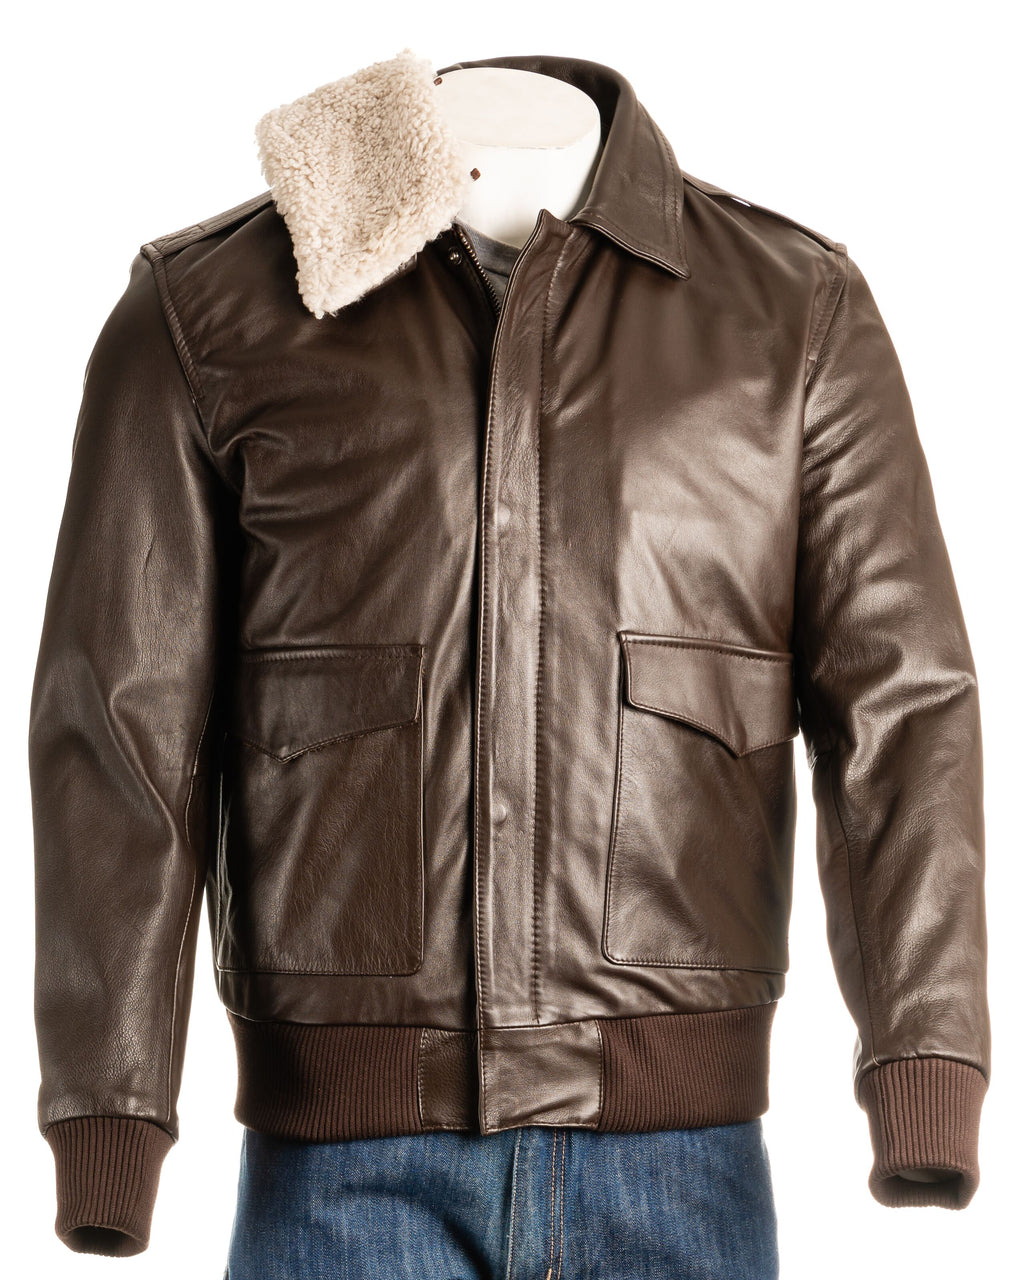 Men's Brown Aviator Pilot Flight A2 Style Leather Jacket with Detachable Real Sheepskin Collar: Maurizio